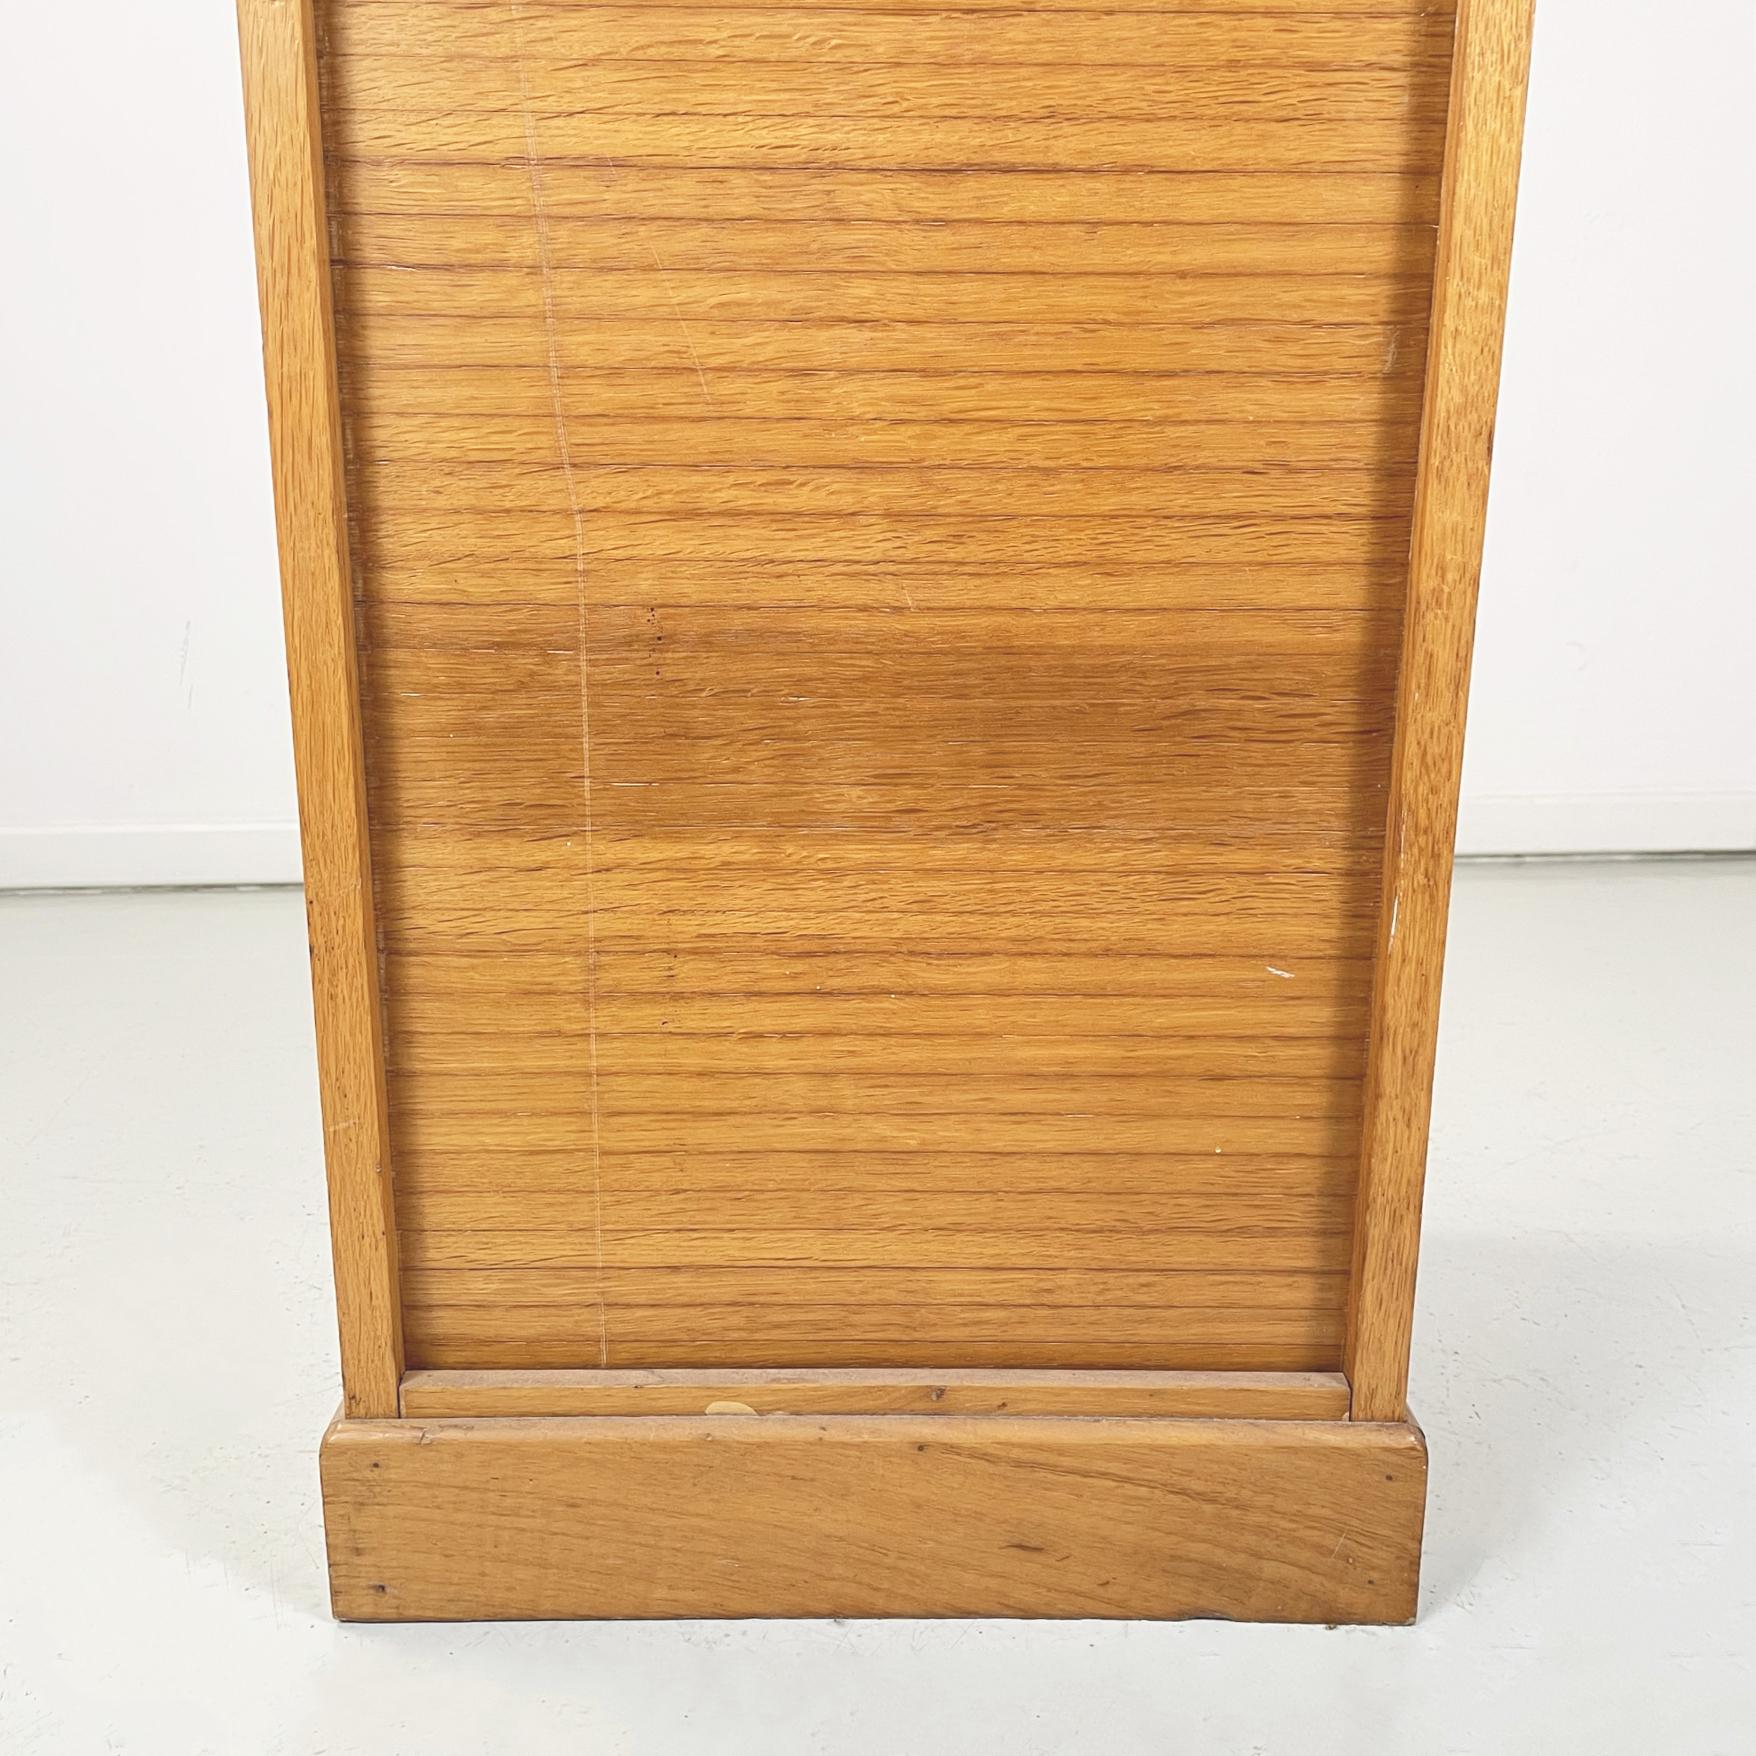 Italian Mid-Century Modern Wooden Office Filing Cabine Archive Dresser, 1940s For Sale 7